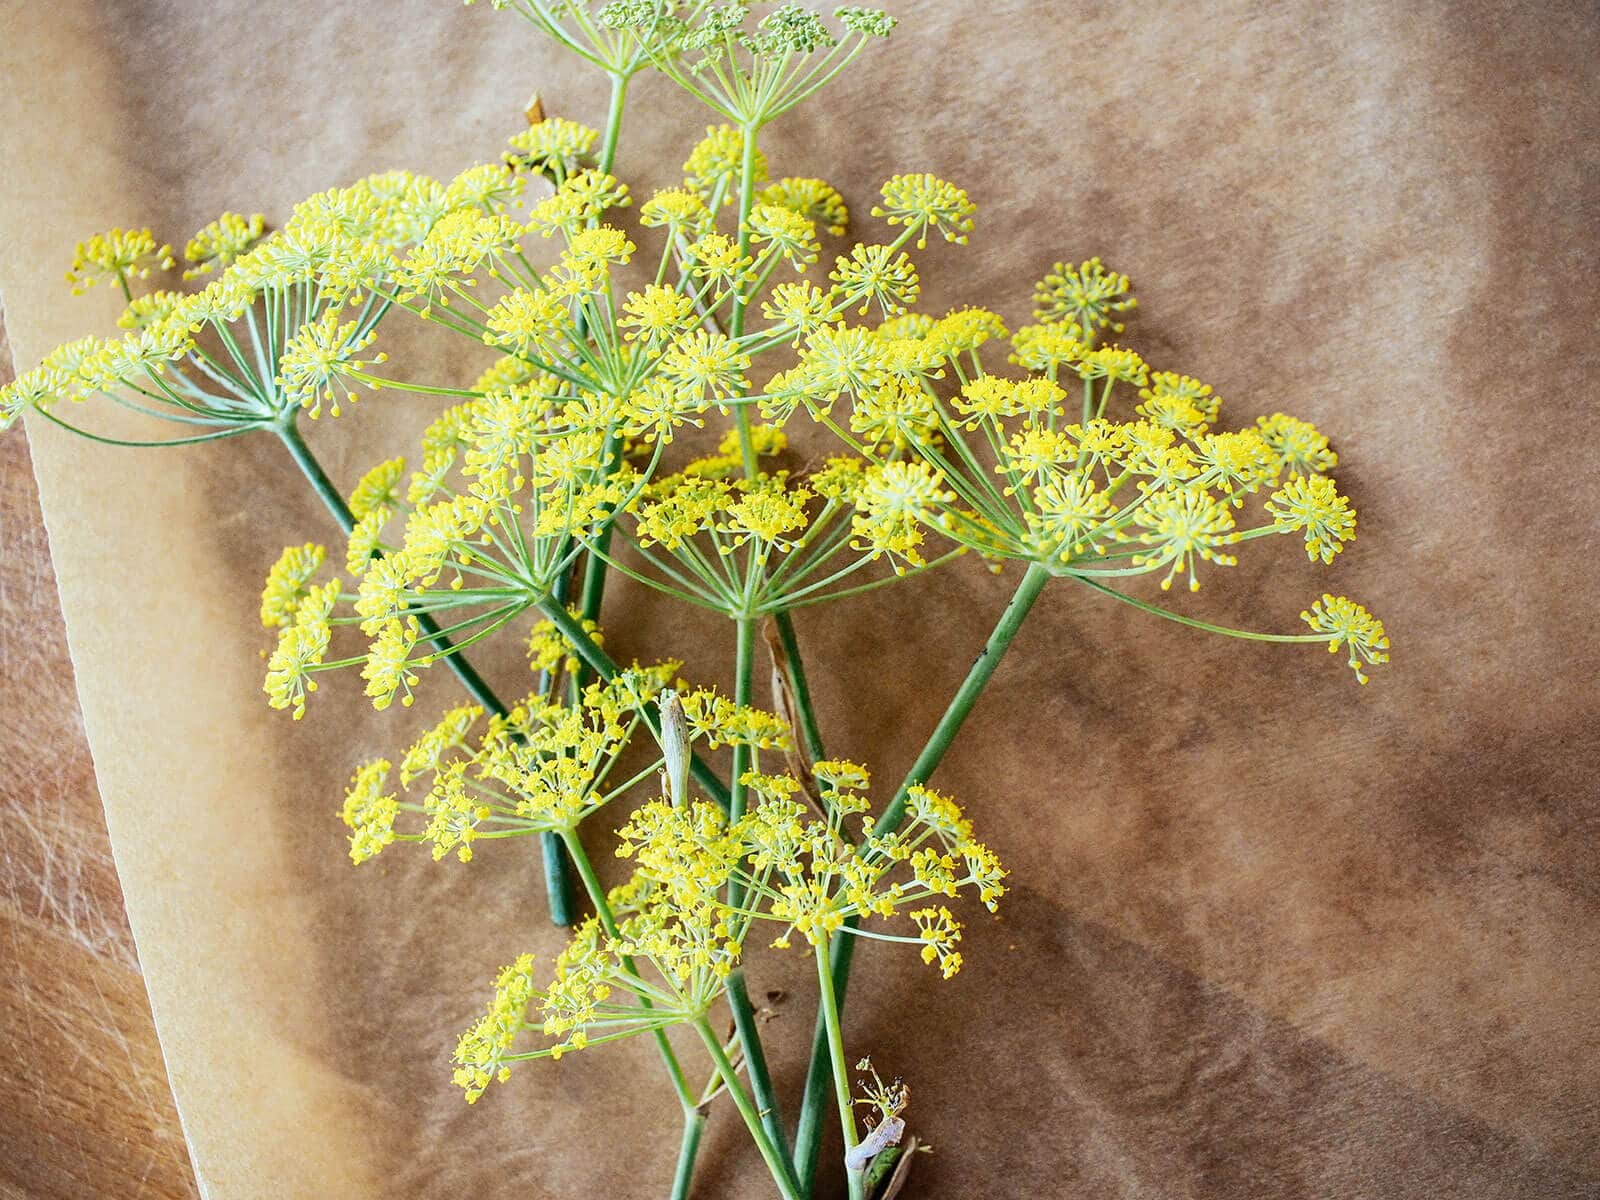 Bundle of fennel flower heads on a sheet of parchment paper